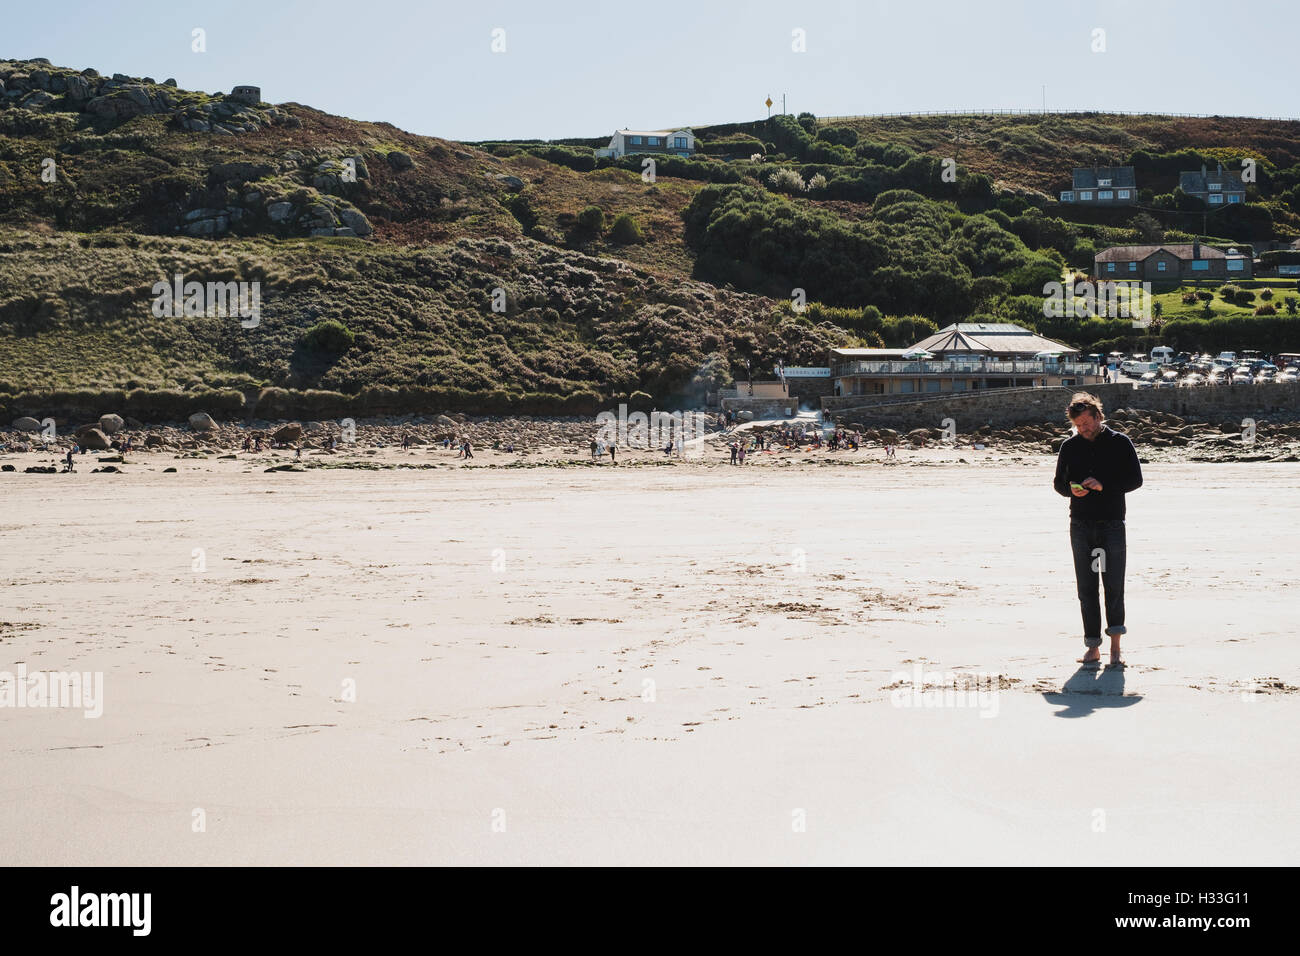 A lone man checking his phone on the beach at Sennen Cove, Cornwall Stock Photo